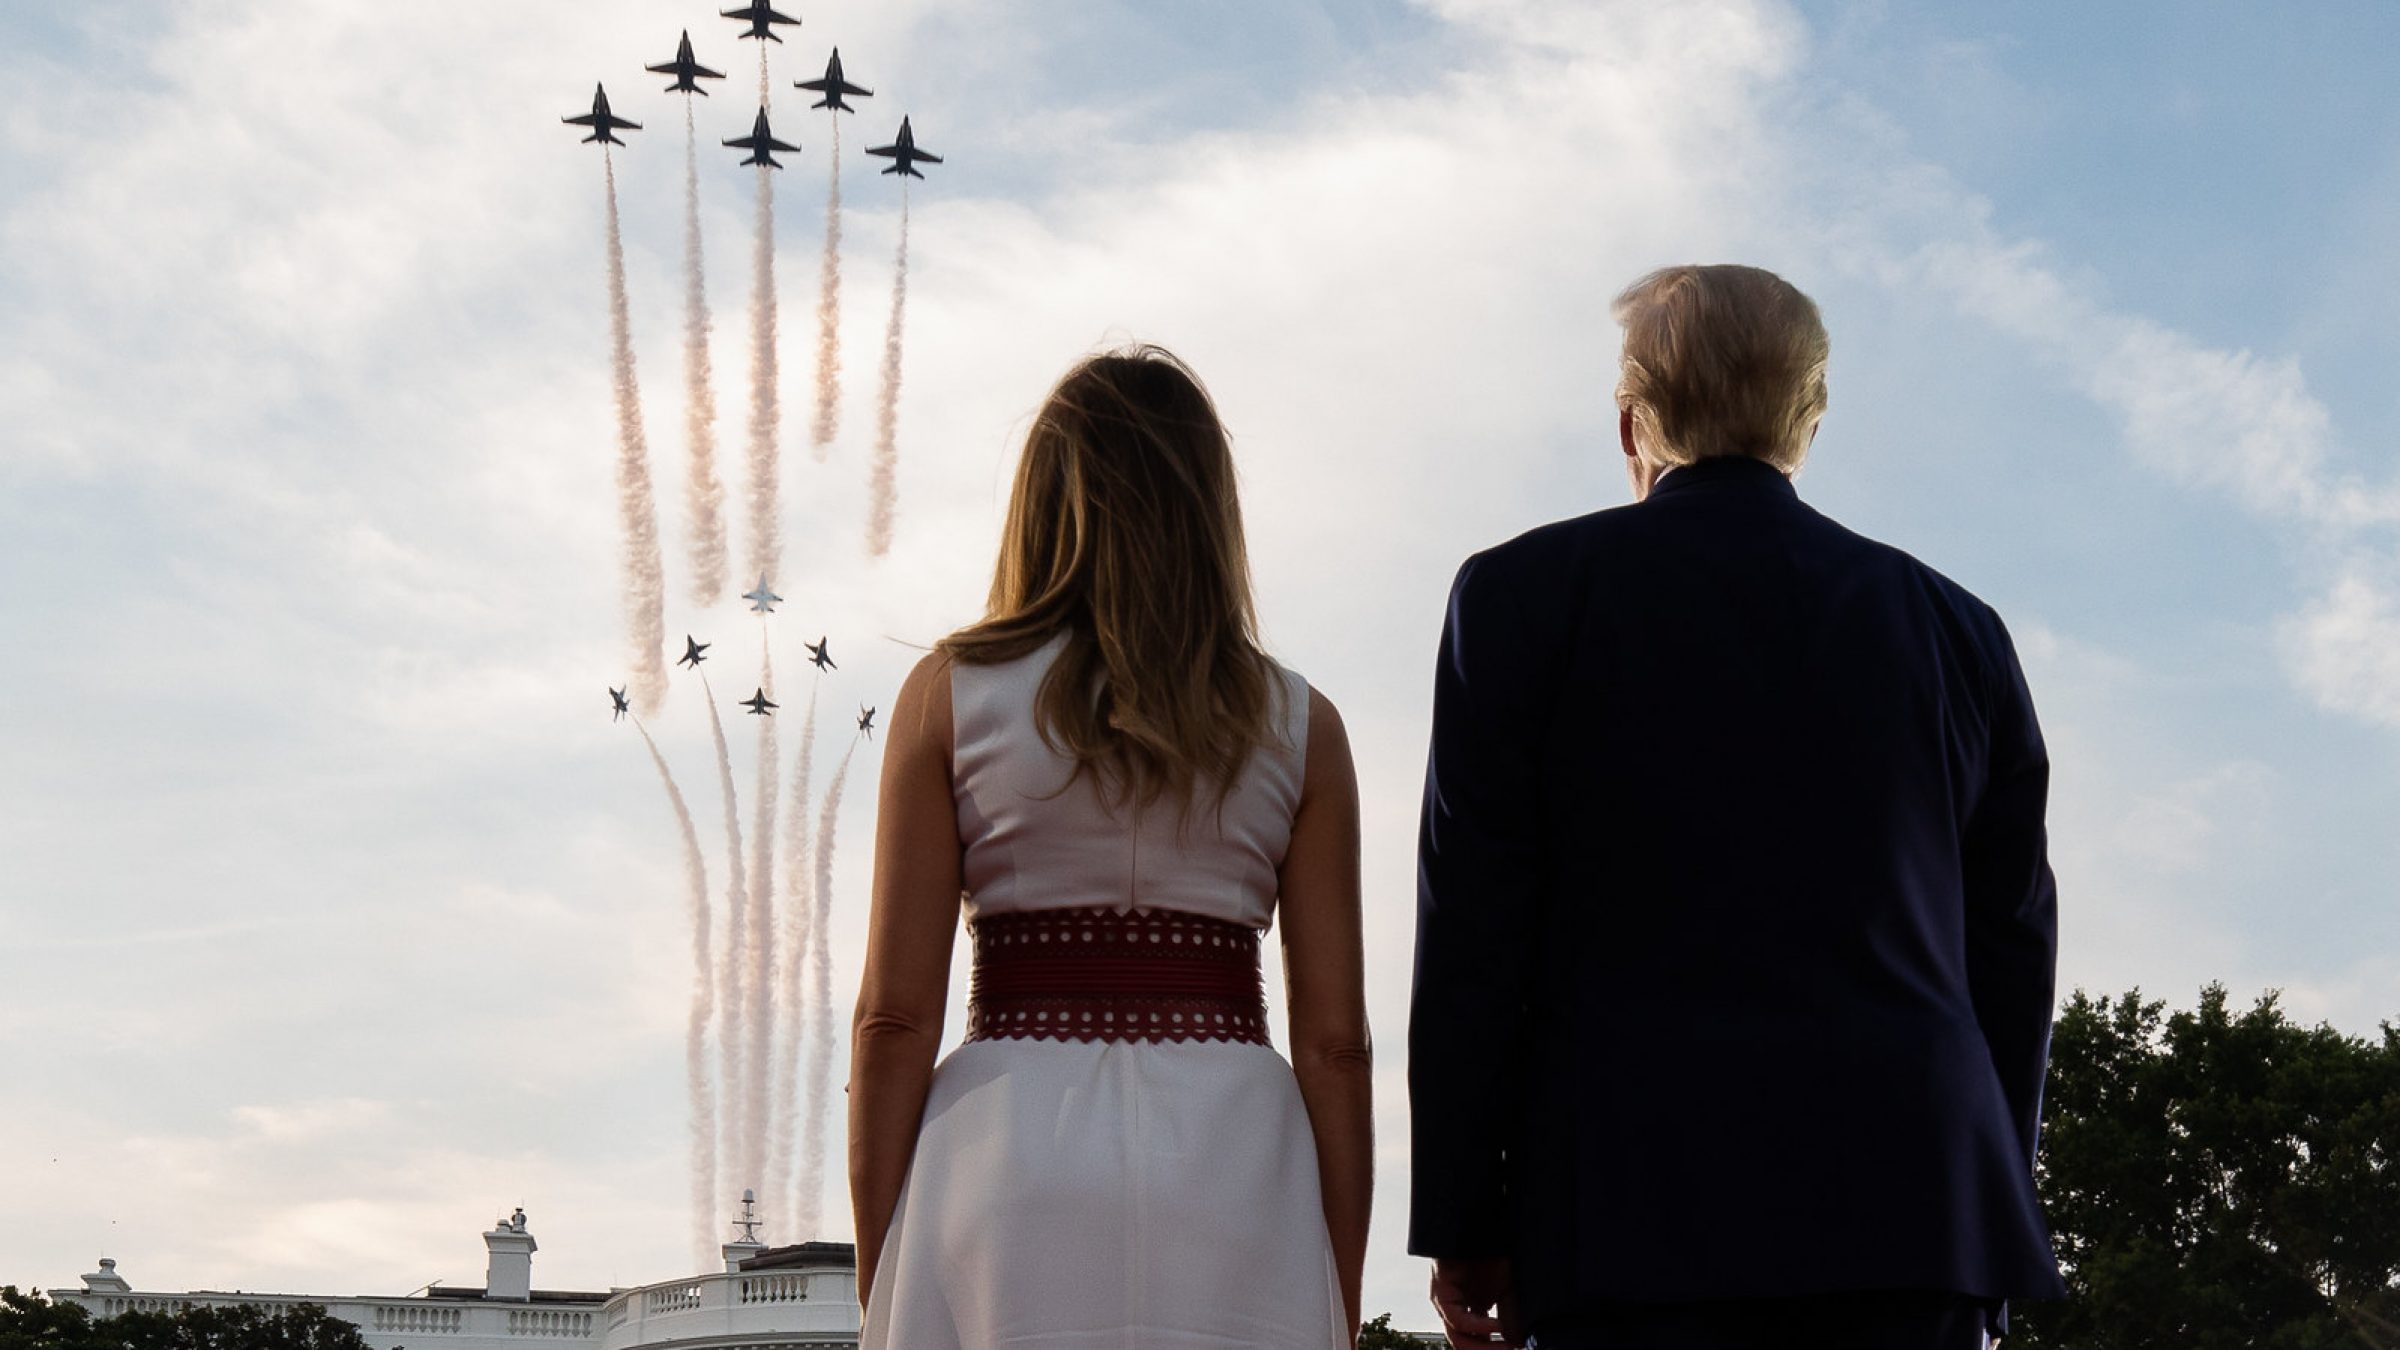 Donald and Melania Trump stand on the South Lawn of the White House, watching a military flyover